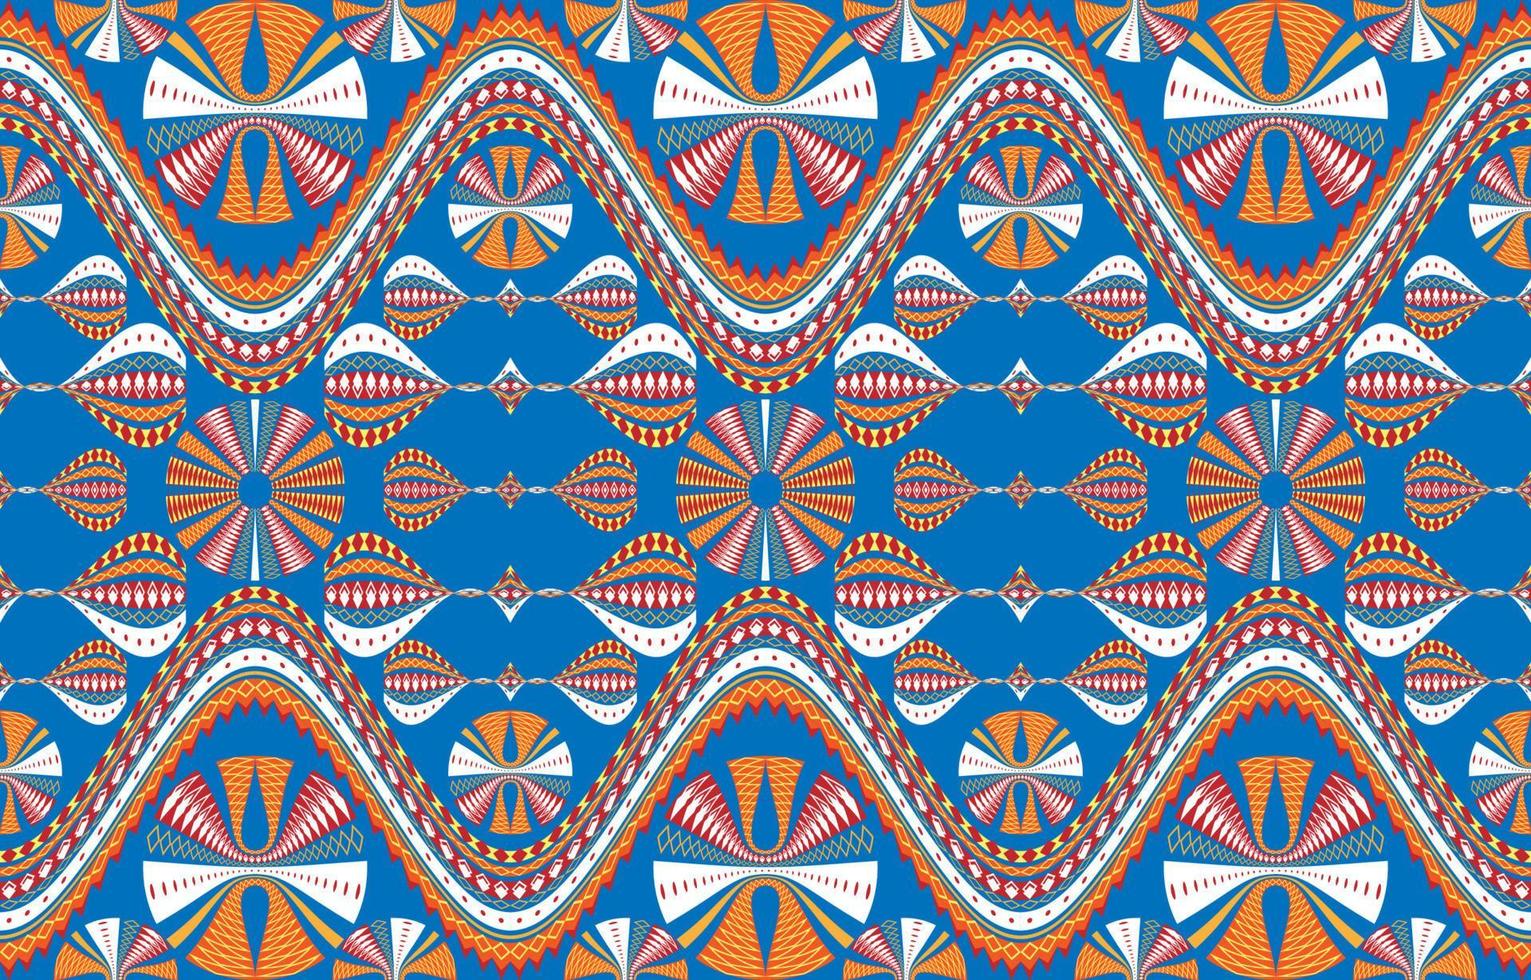 Fabric textile pattern circle wavy diagonal curve stripes. Ethnic geometric tribal native aztec arabesque fabric carpet Indian Arabian African seamless patterns. Ornate line graphic embroidery style. vector